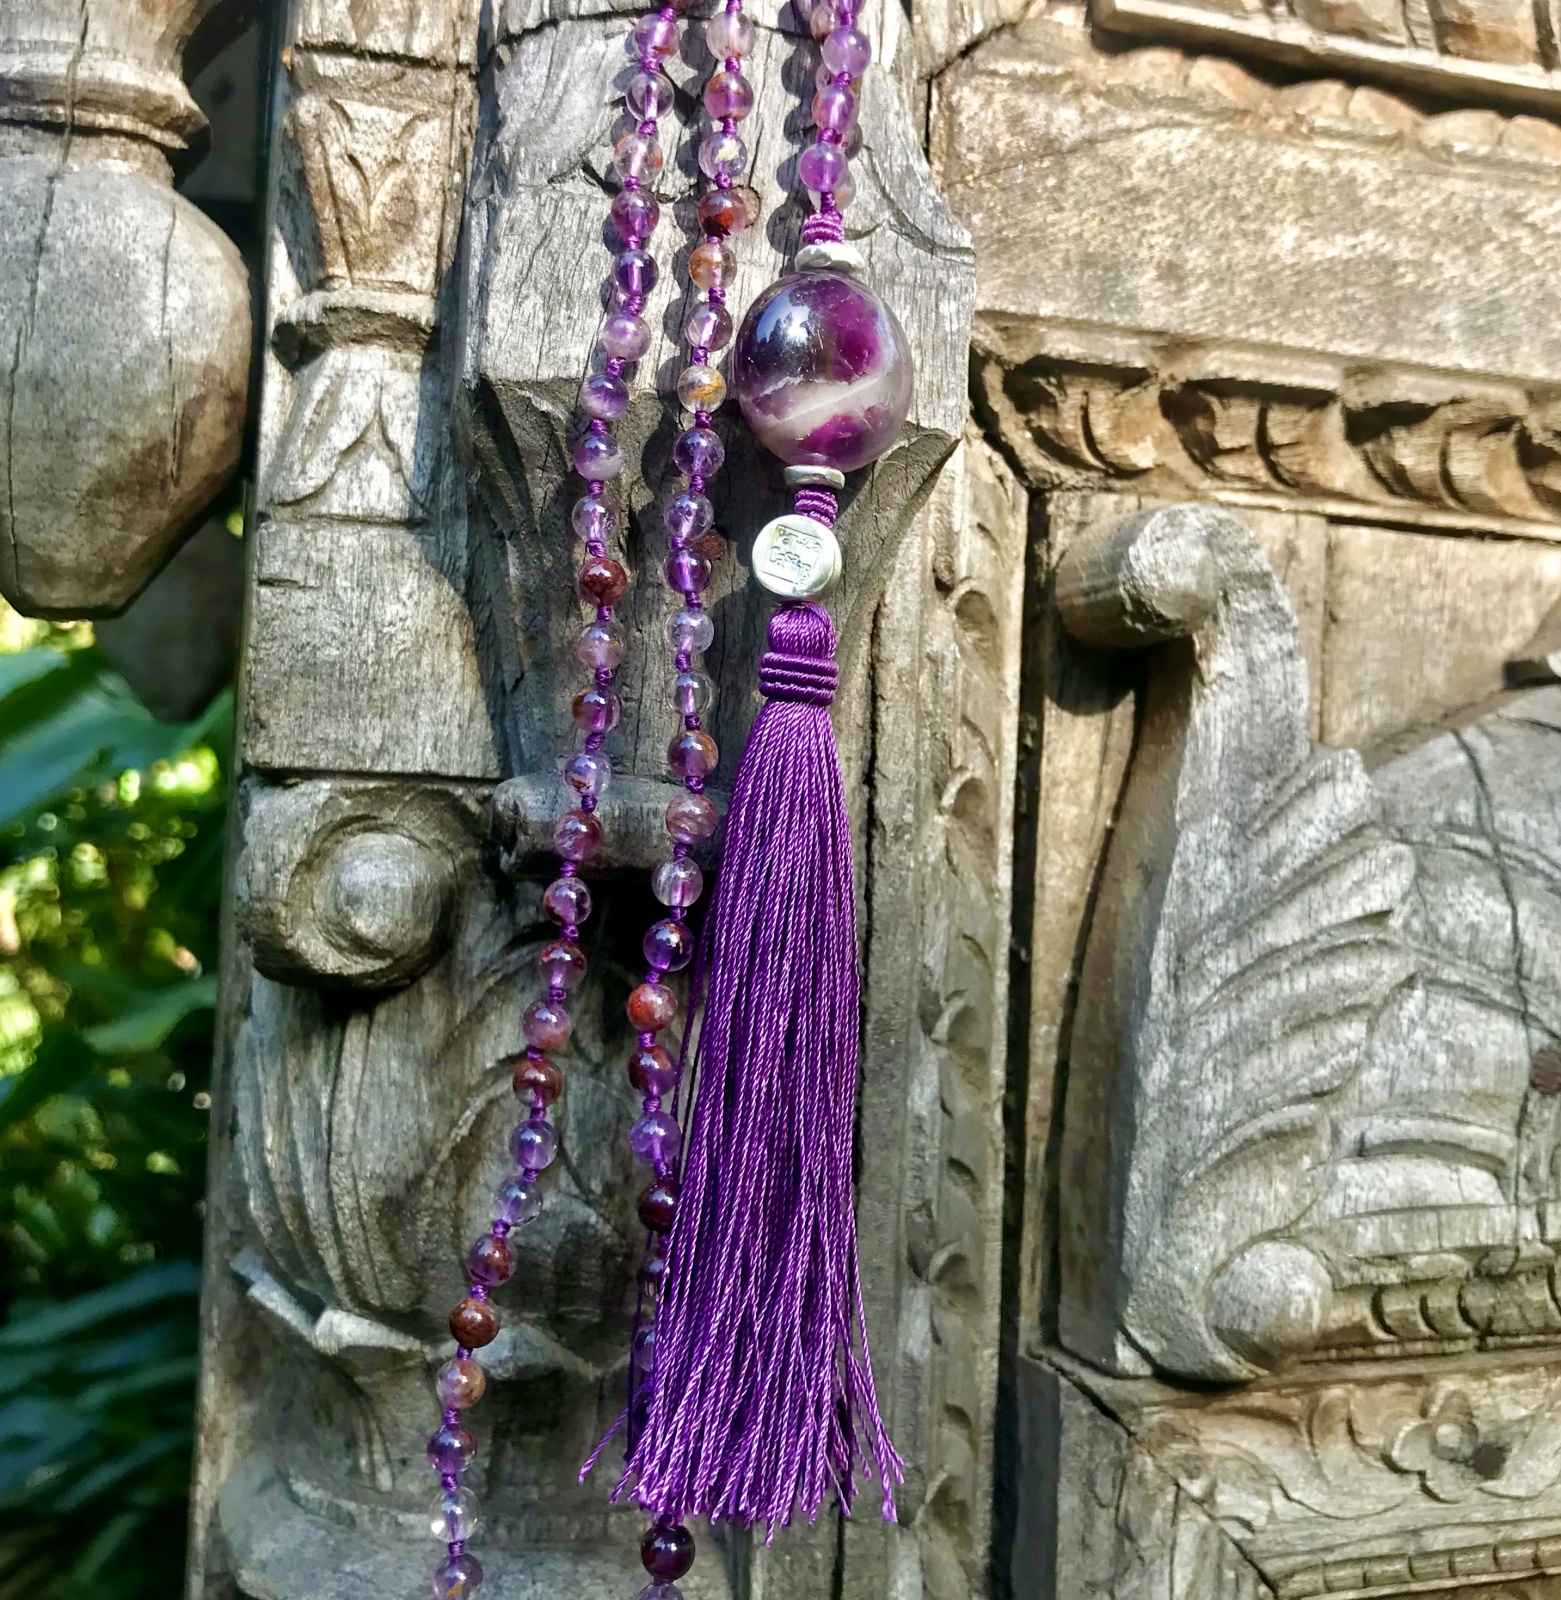 One of a Kind Mala - €159

Every piece is a one of a kind

Details

Amethyst
925 Sterling Silver
Length cm.77
High Polished Finish
Nickel-free
Handmade
Engraved with Patrizia Casamirra Jewels Logo